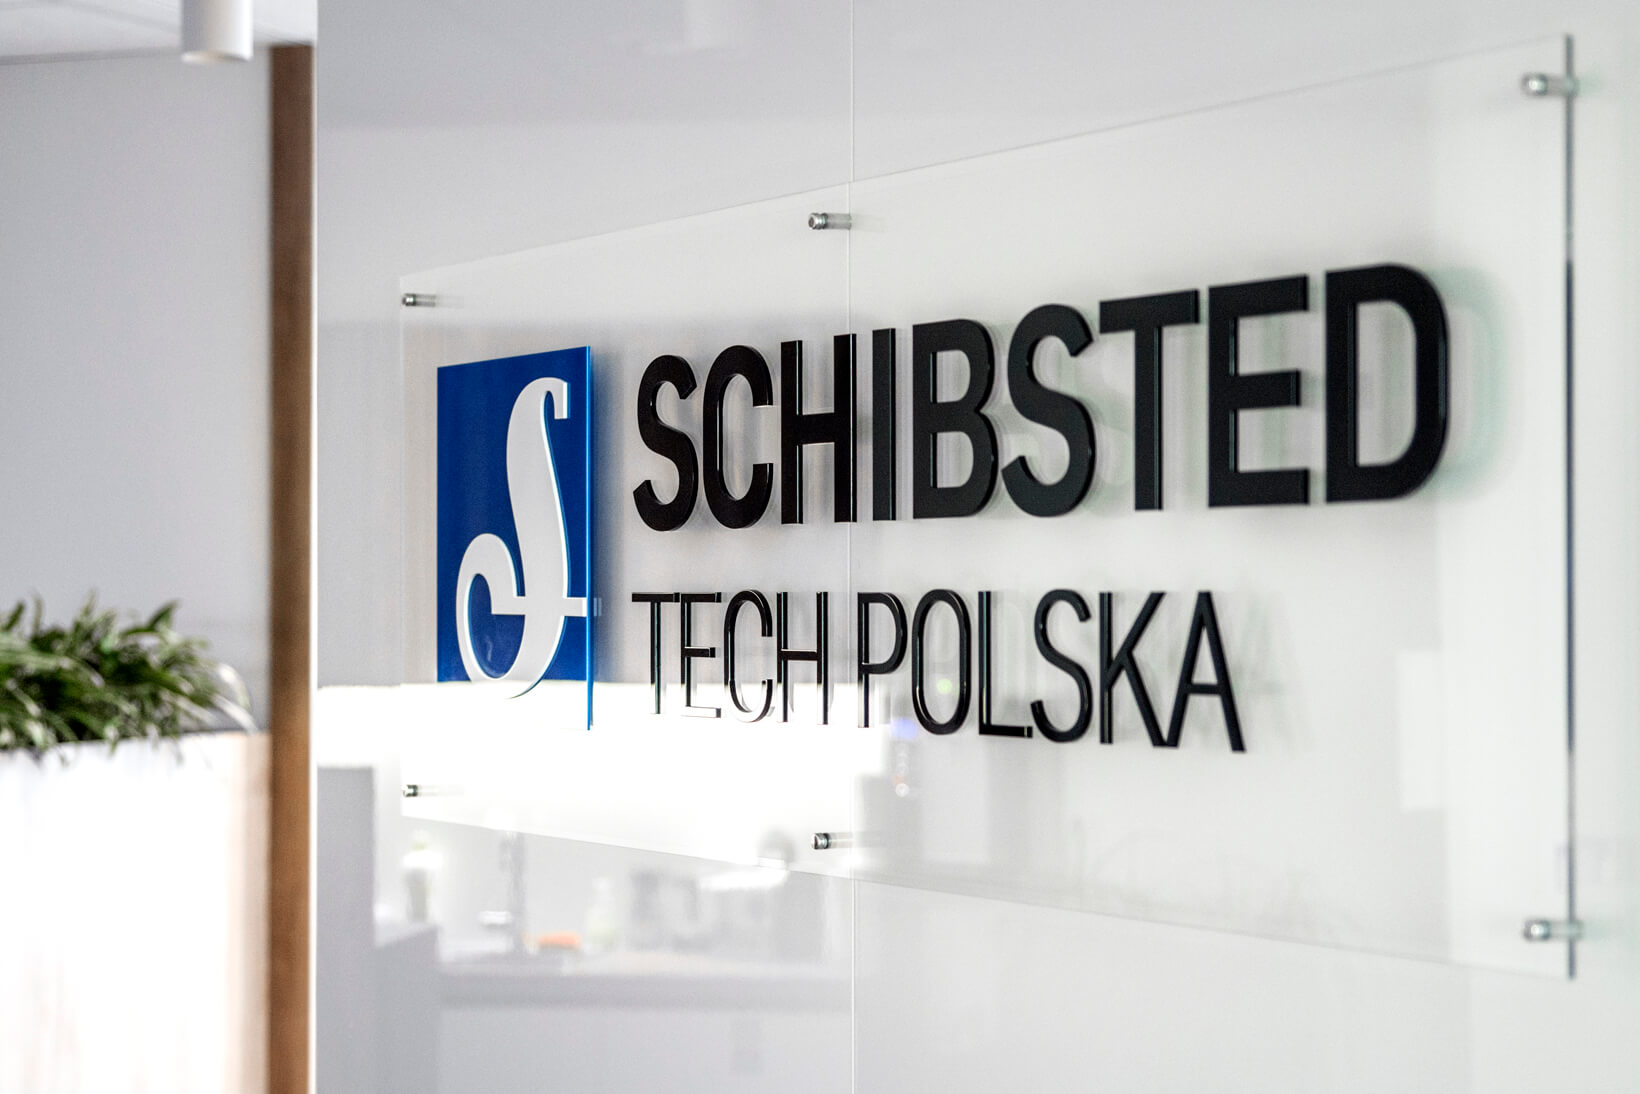 Schibsted Tech Polska - Schibsted Tech Poland - logo and 3D letters on the basis of plexiglass on the spacers in reception area